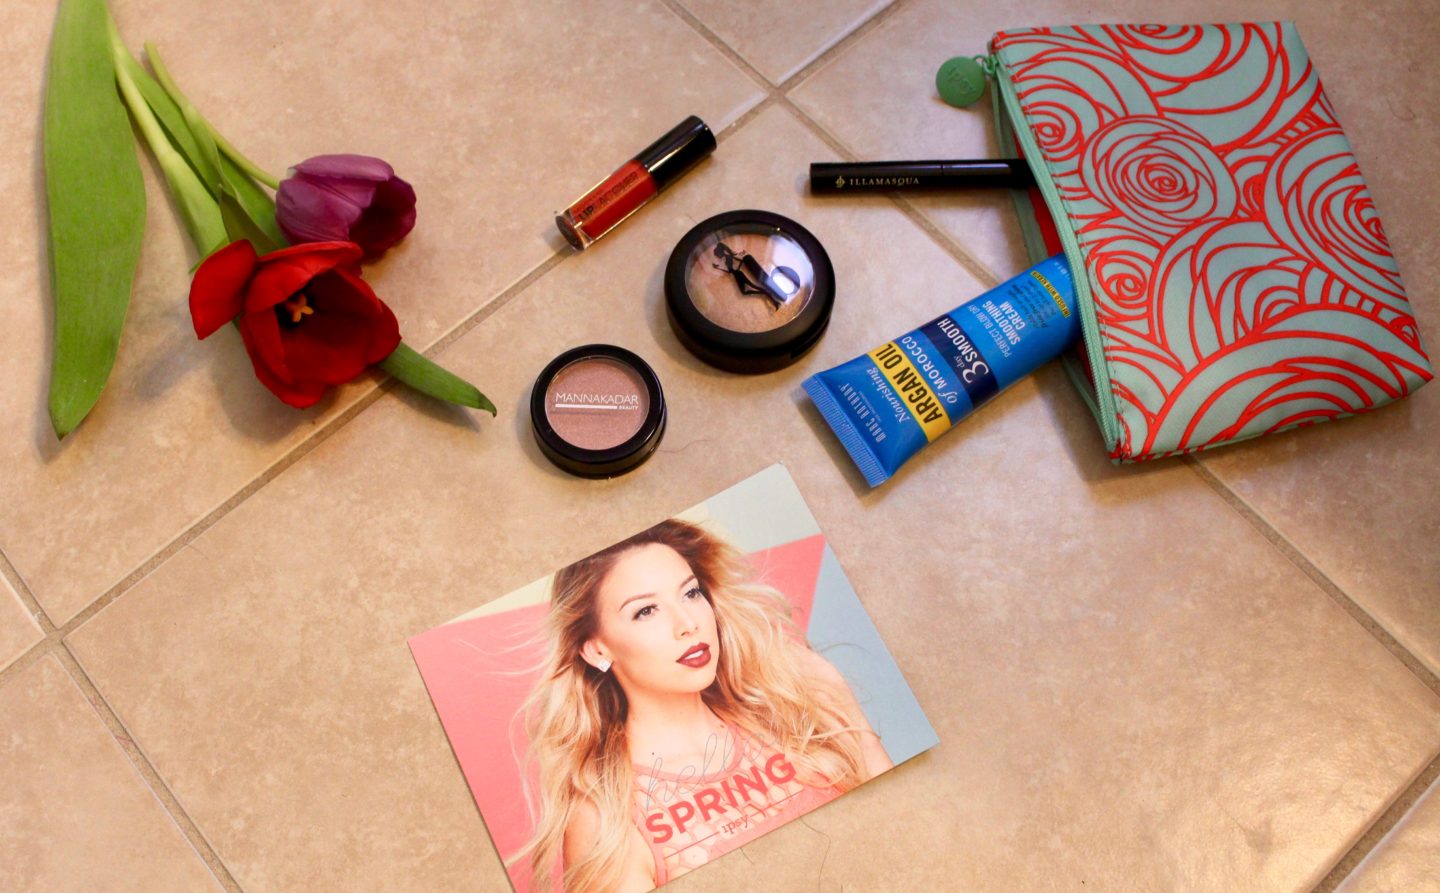 Ipsy Review #9: “Hello Spring” March Glam Bag